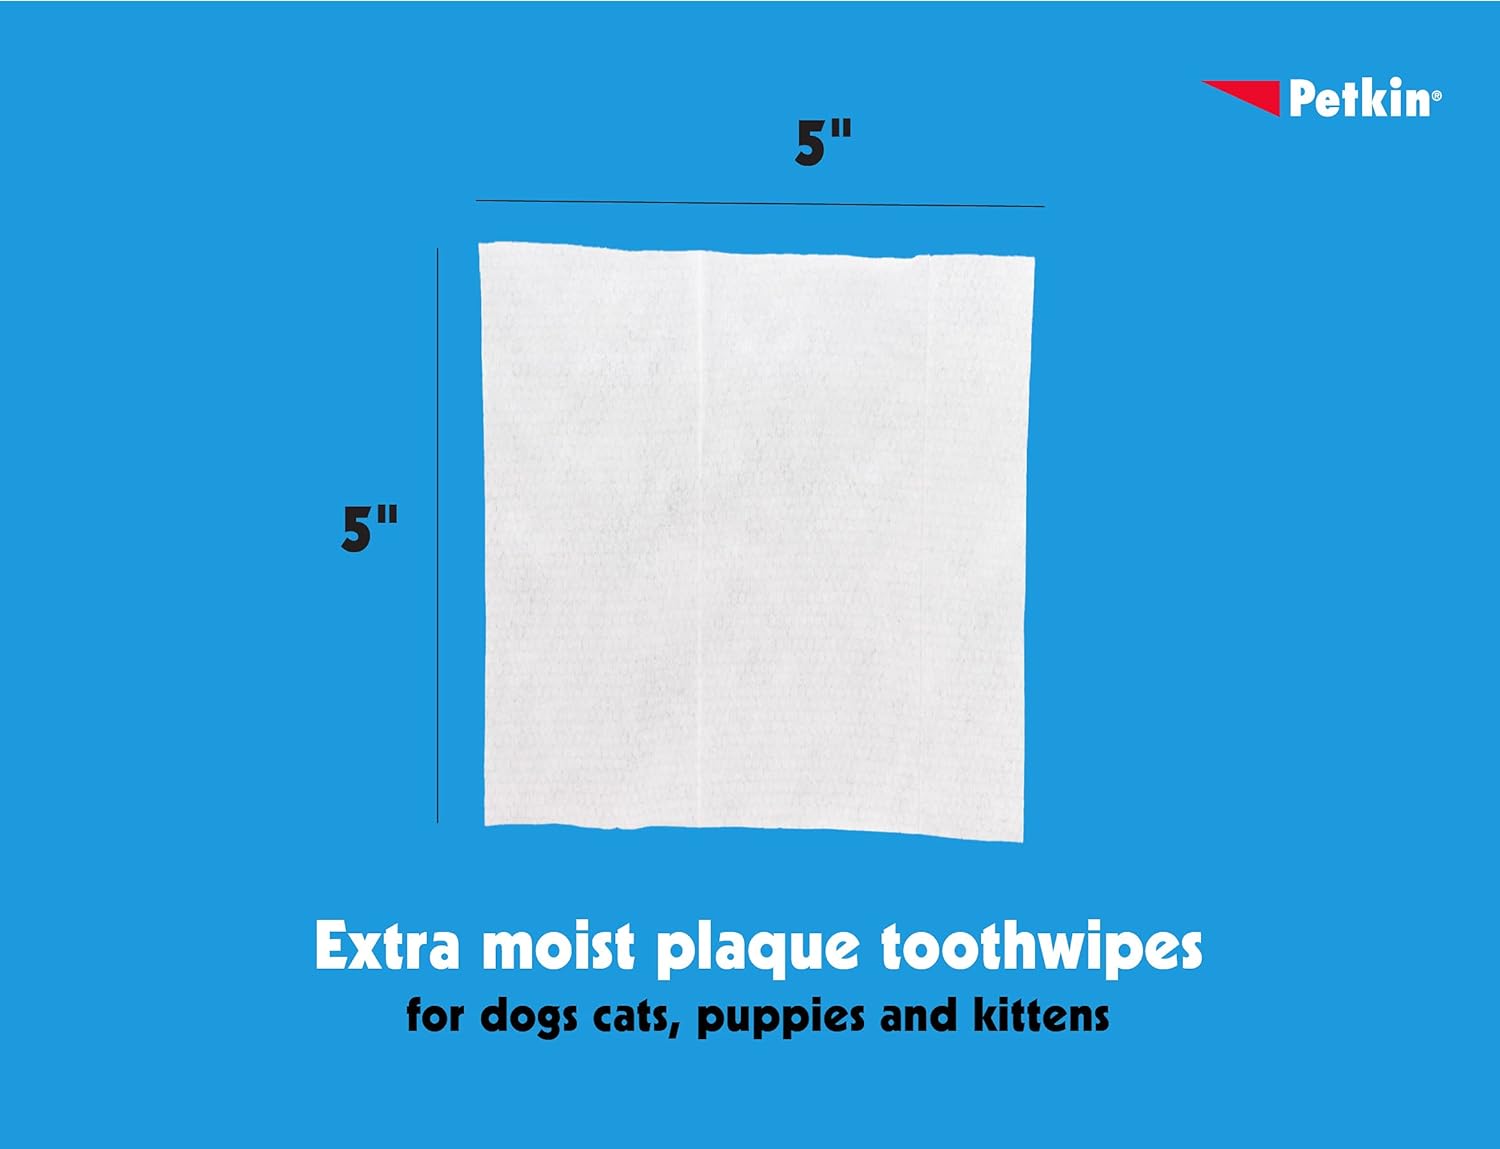 Petkin Cat and Dog Dental Wipes, 80 Wipes (Fresh Mint) - Natural Formula Cleans Teeth, Gums & Freshens Breath - for Daily Use - Convenient Dog Dental Care - 2 Packs of 40 Wipes (80 Wipes Total) : Pet Supplies